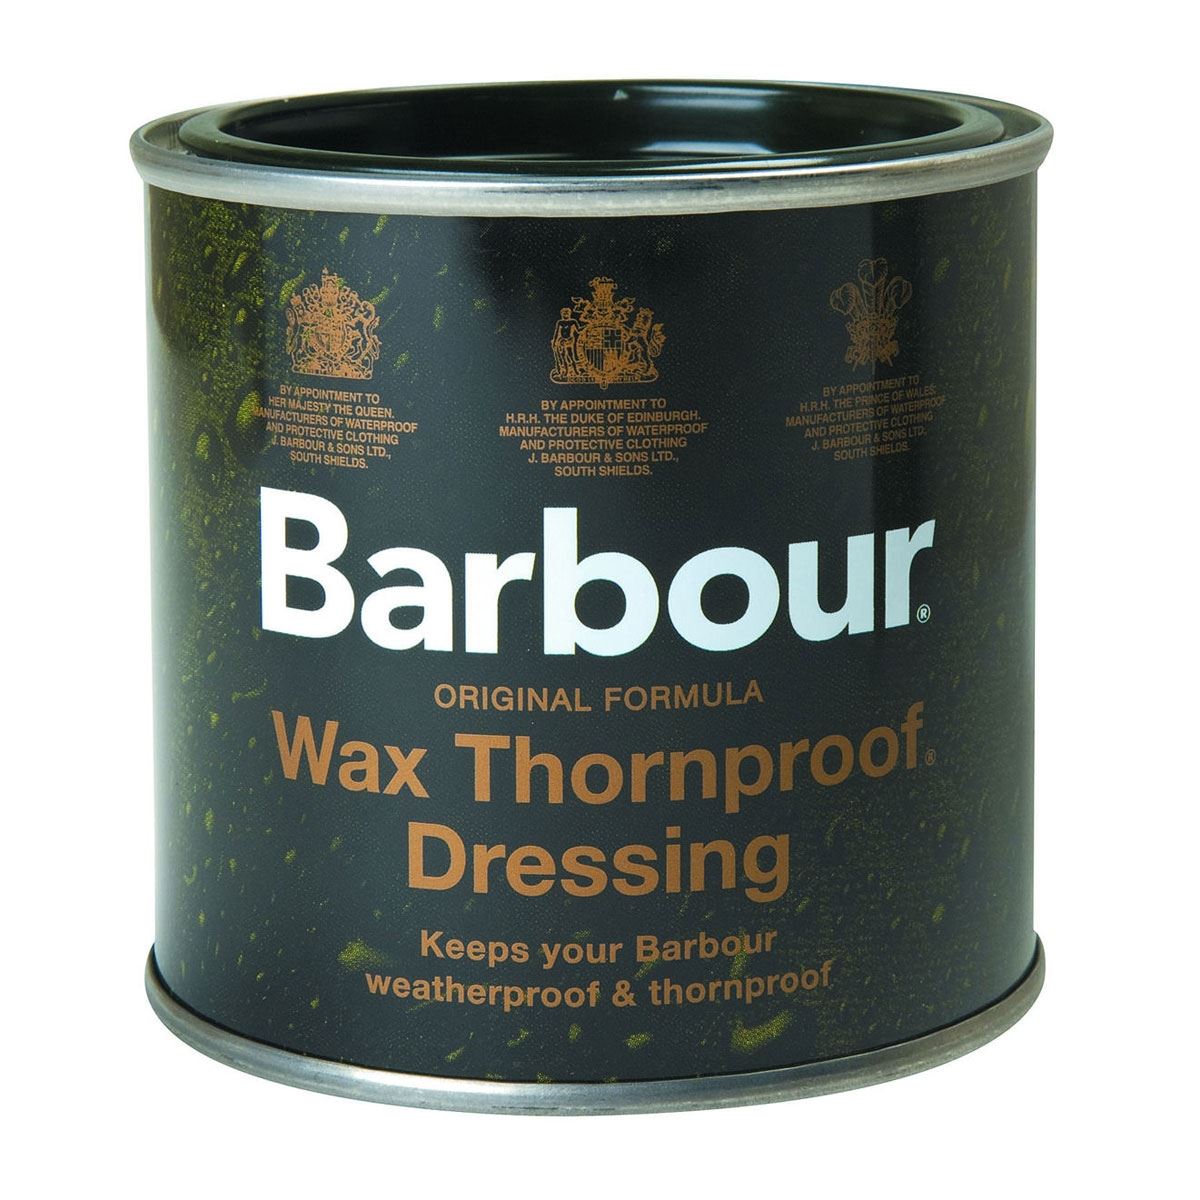 What does the Barbour Wax Thornproof Dressing protect with its Barbour wax?